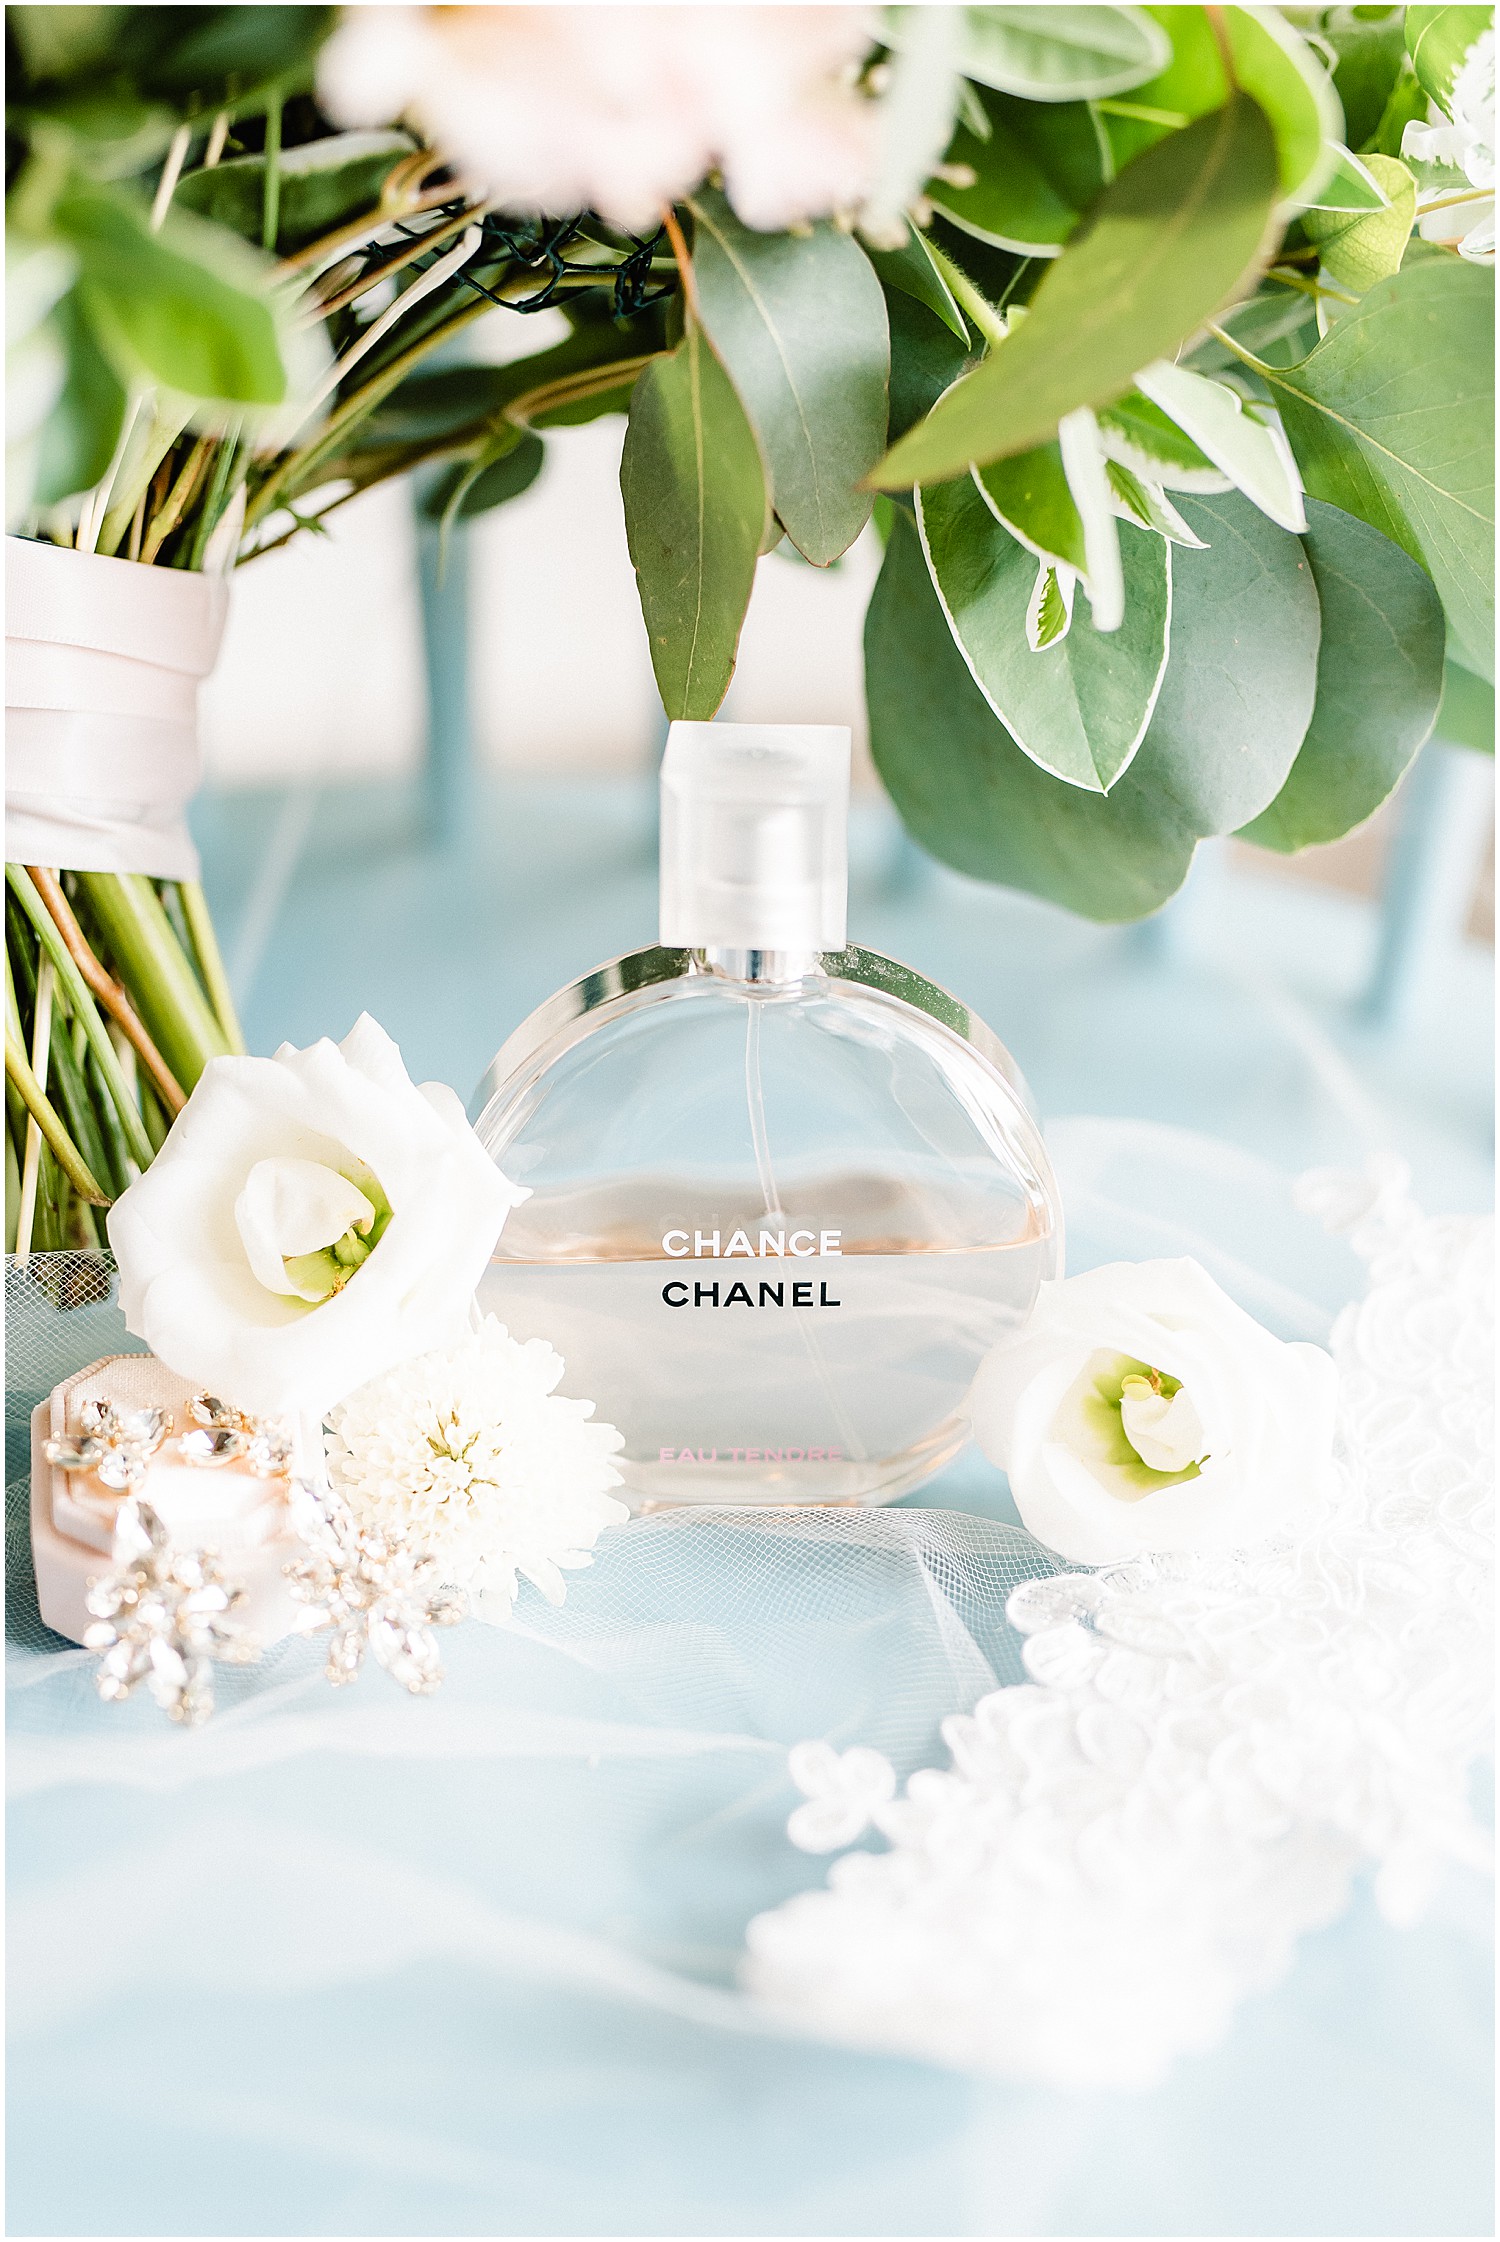 up close image of Chanel perfume with white flowers and green bouquet